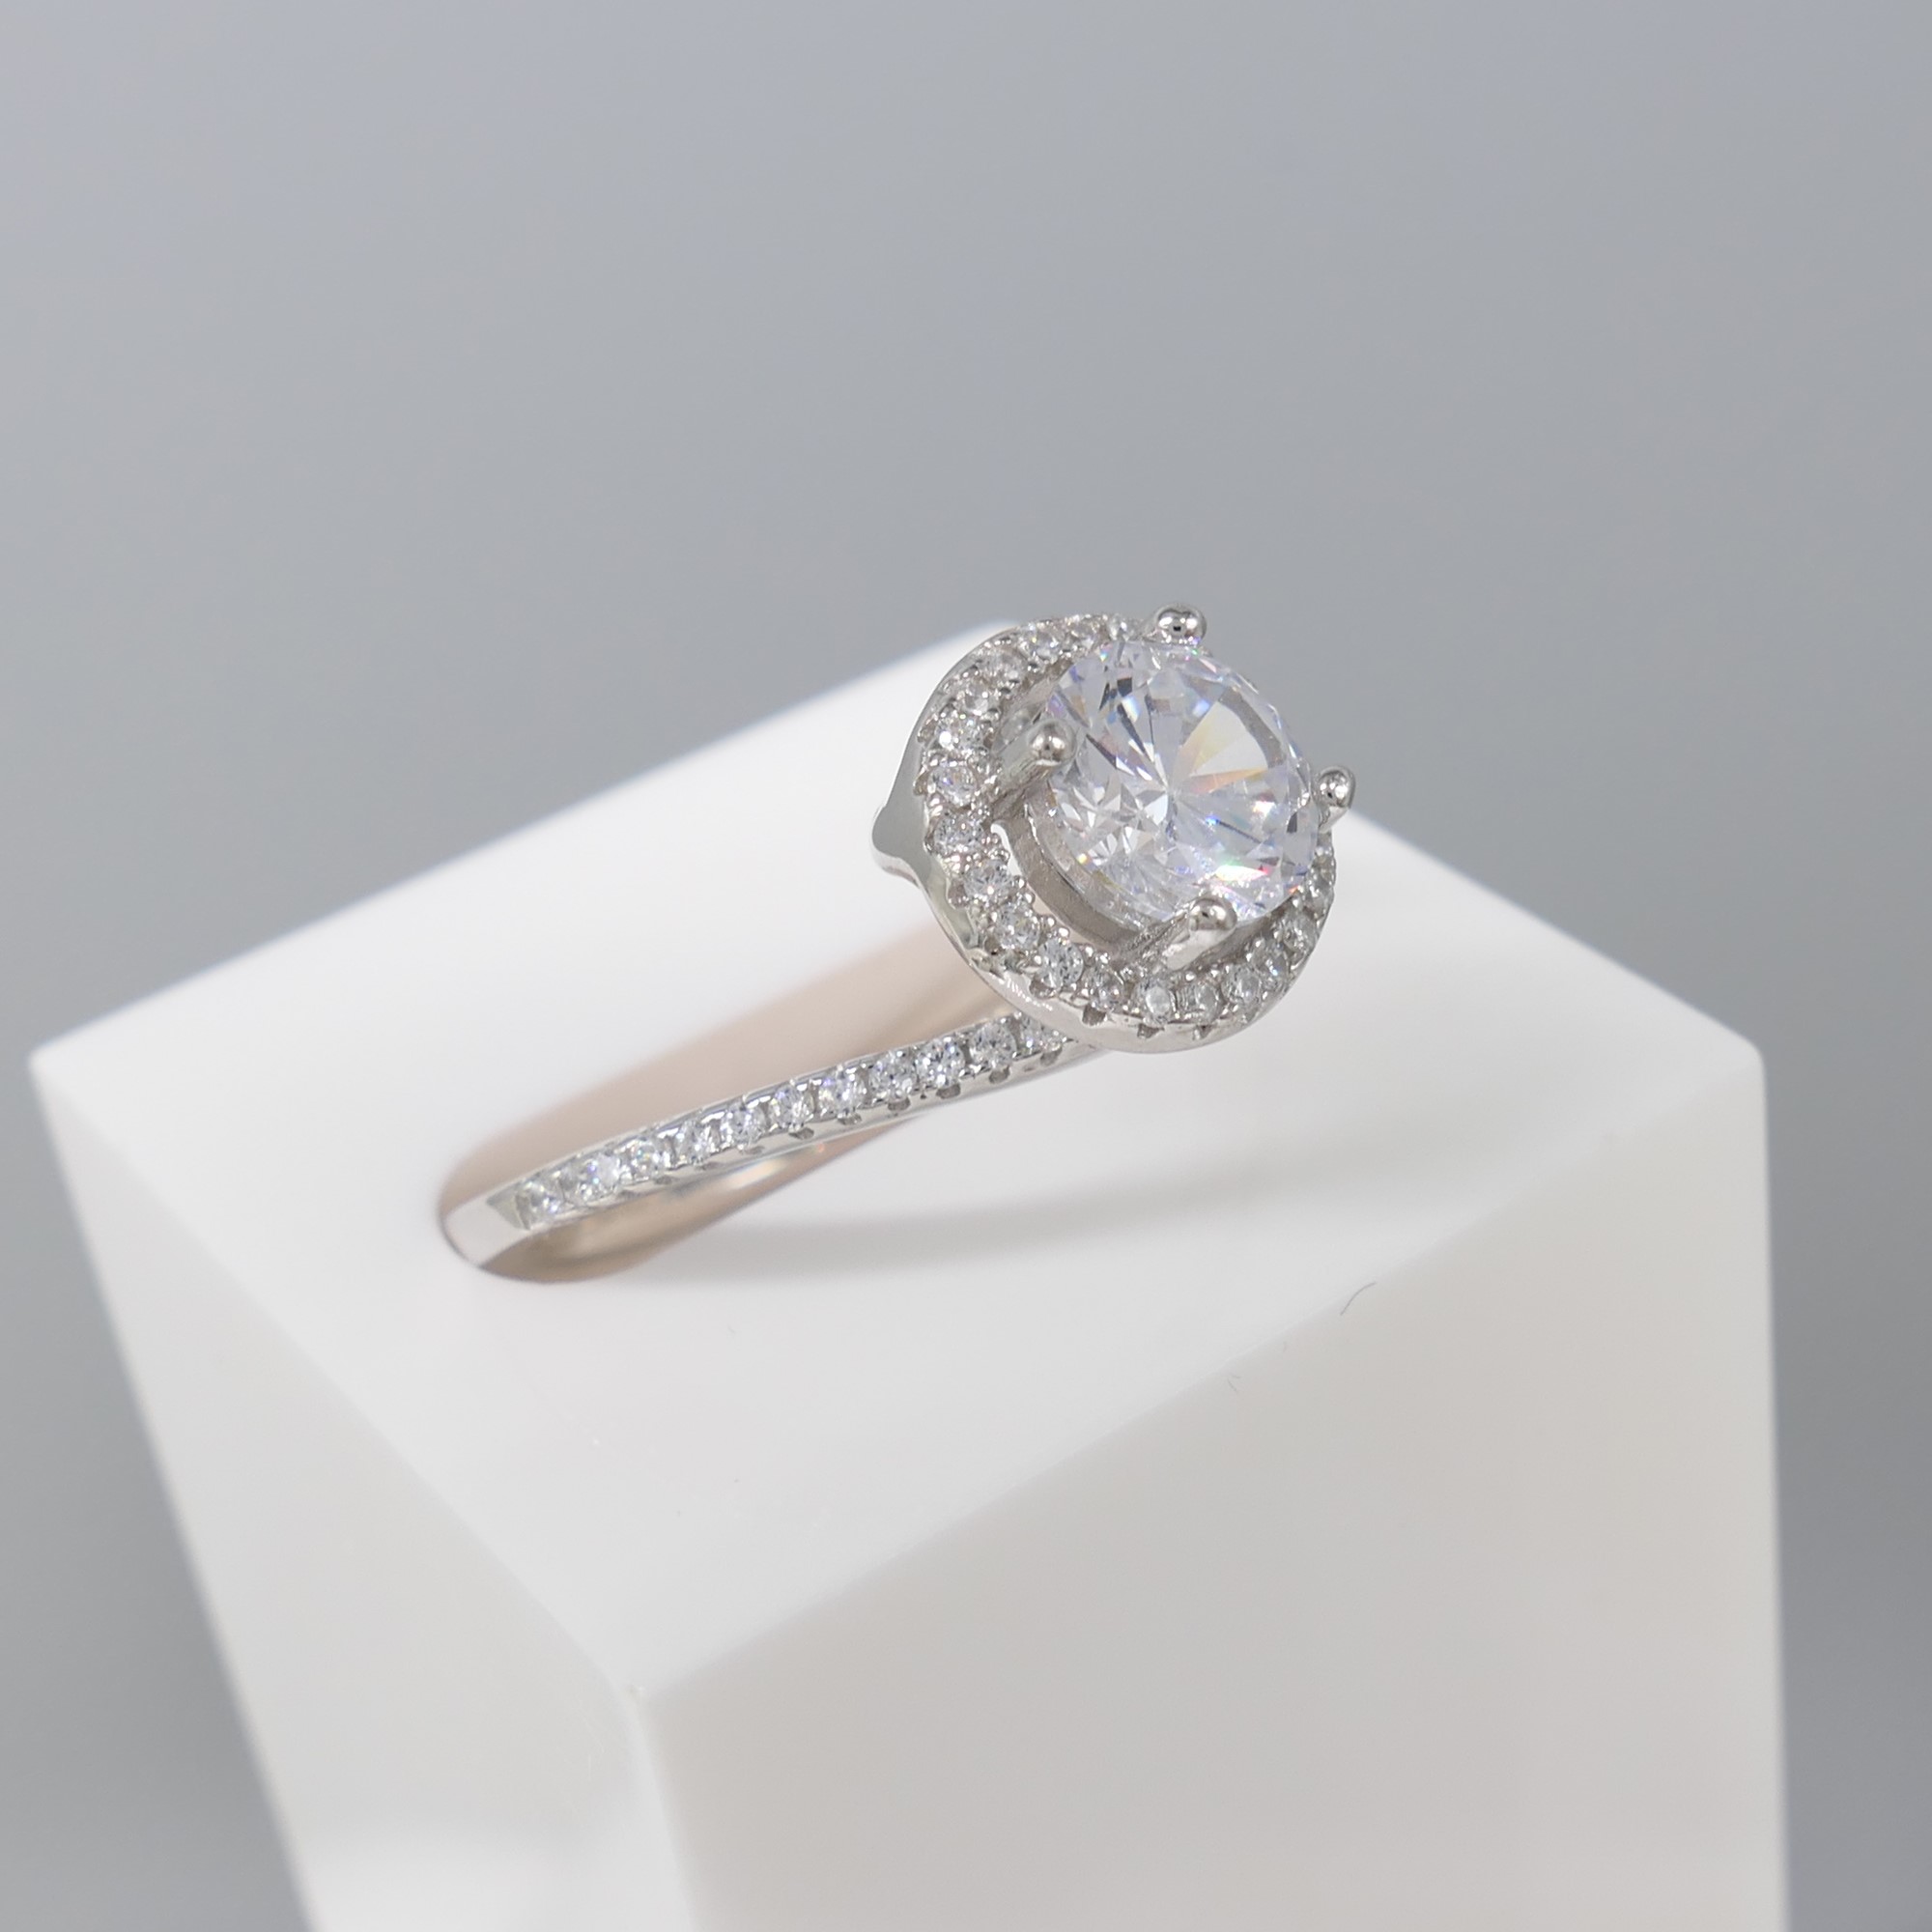 Silver cubic zirconia halo and twist dress ring - Image 5 of 6